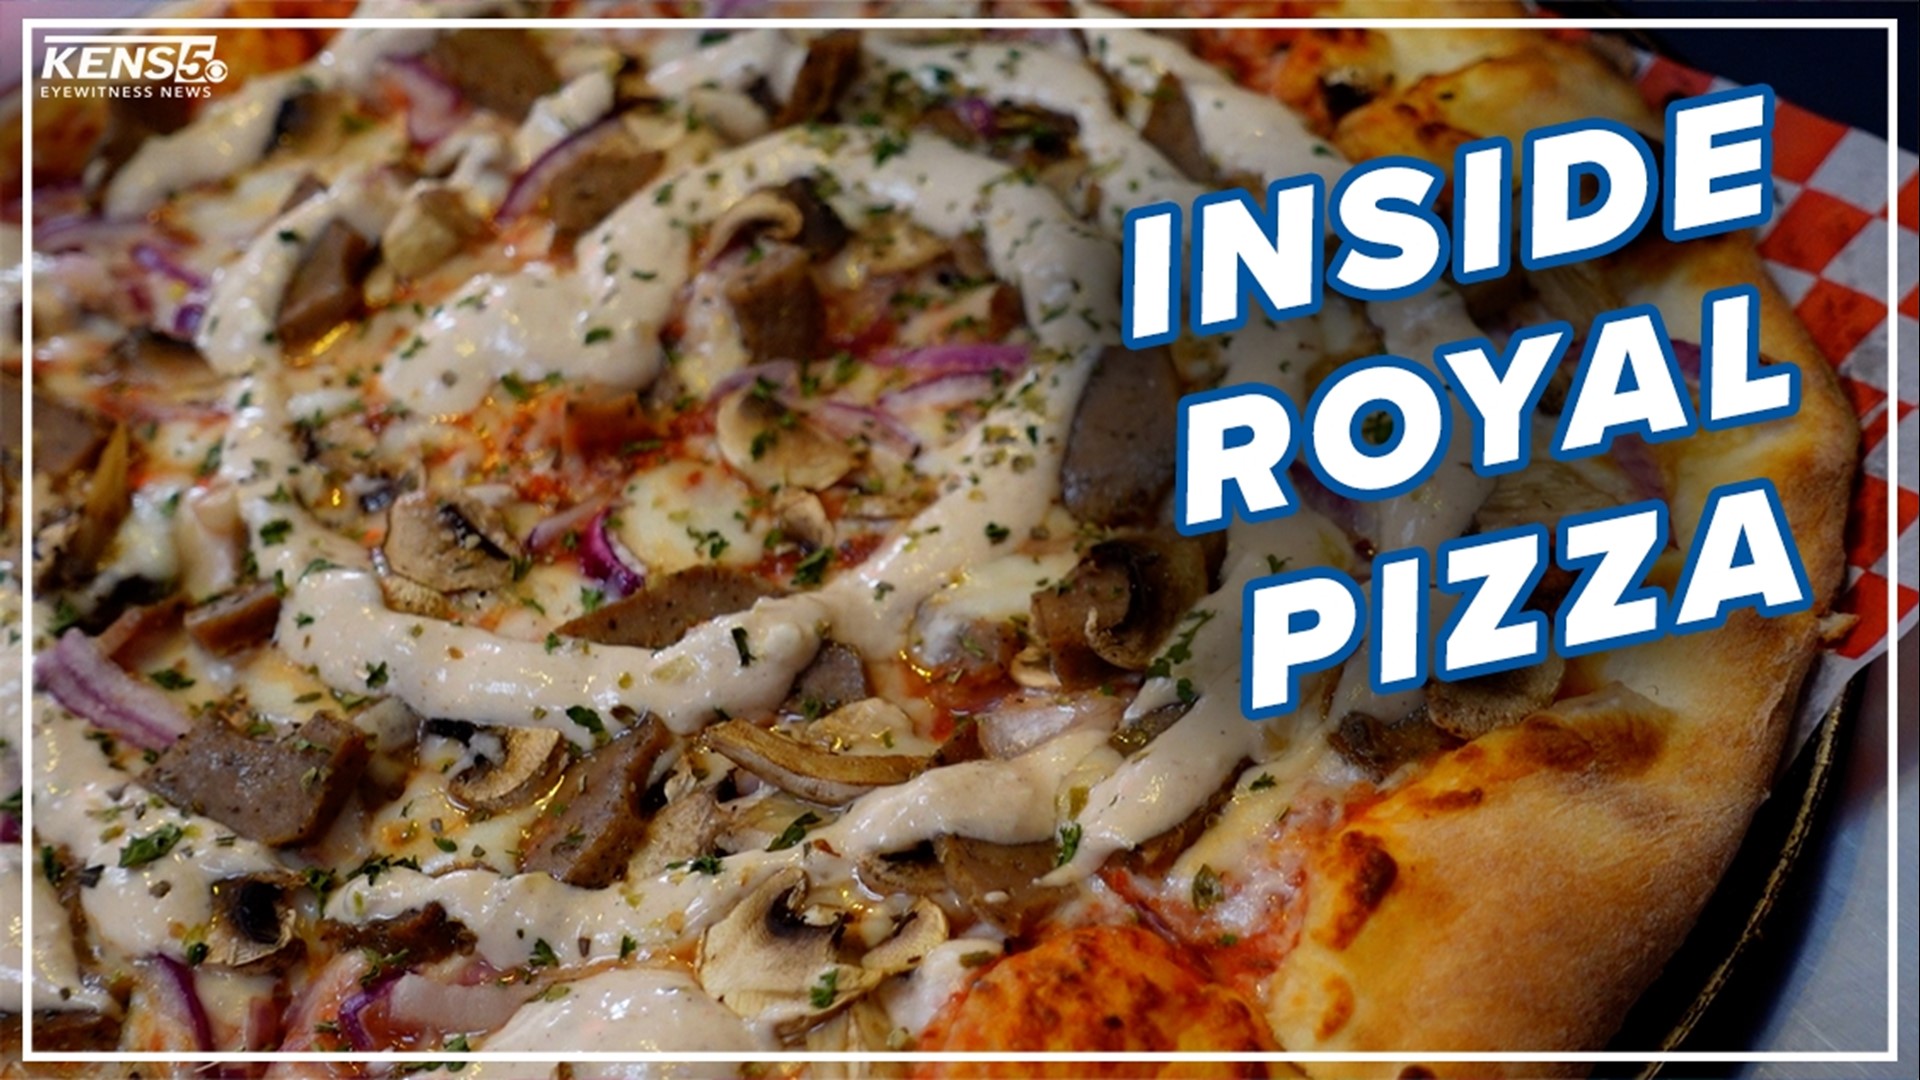 Every few months, Royal Pizza introduces a new pizza to the community. Currently in the rotation is the Pistachio Pizza. Lexi Hazlett tries it!